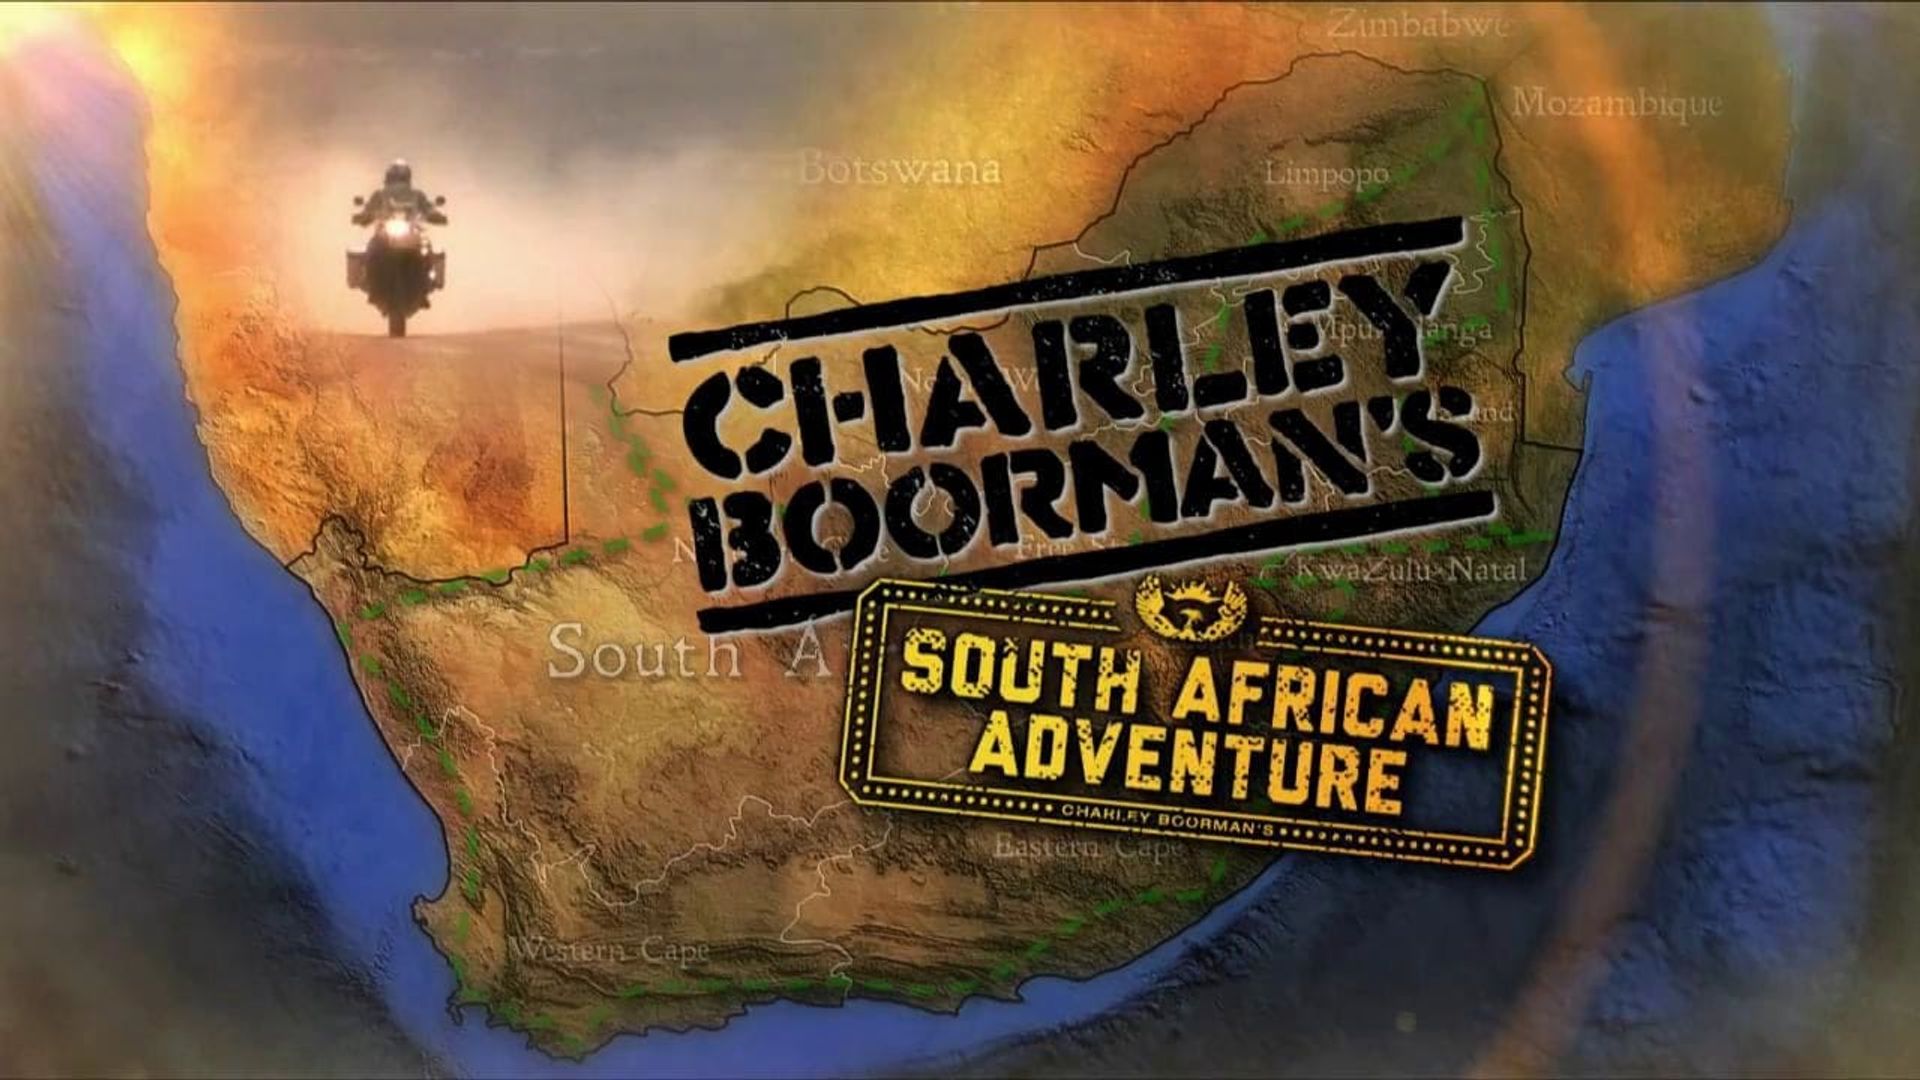 Charley Boorman's South African Adventure background